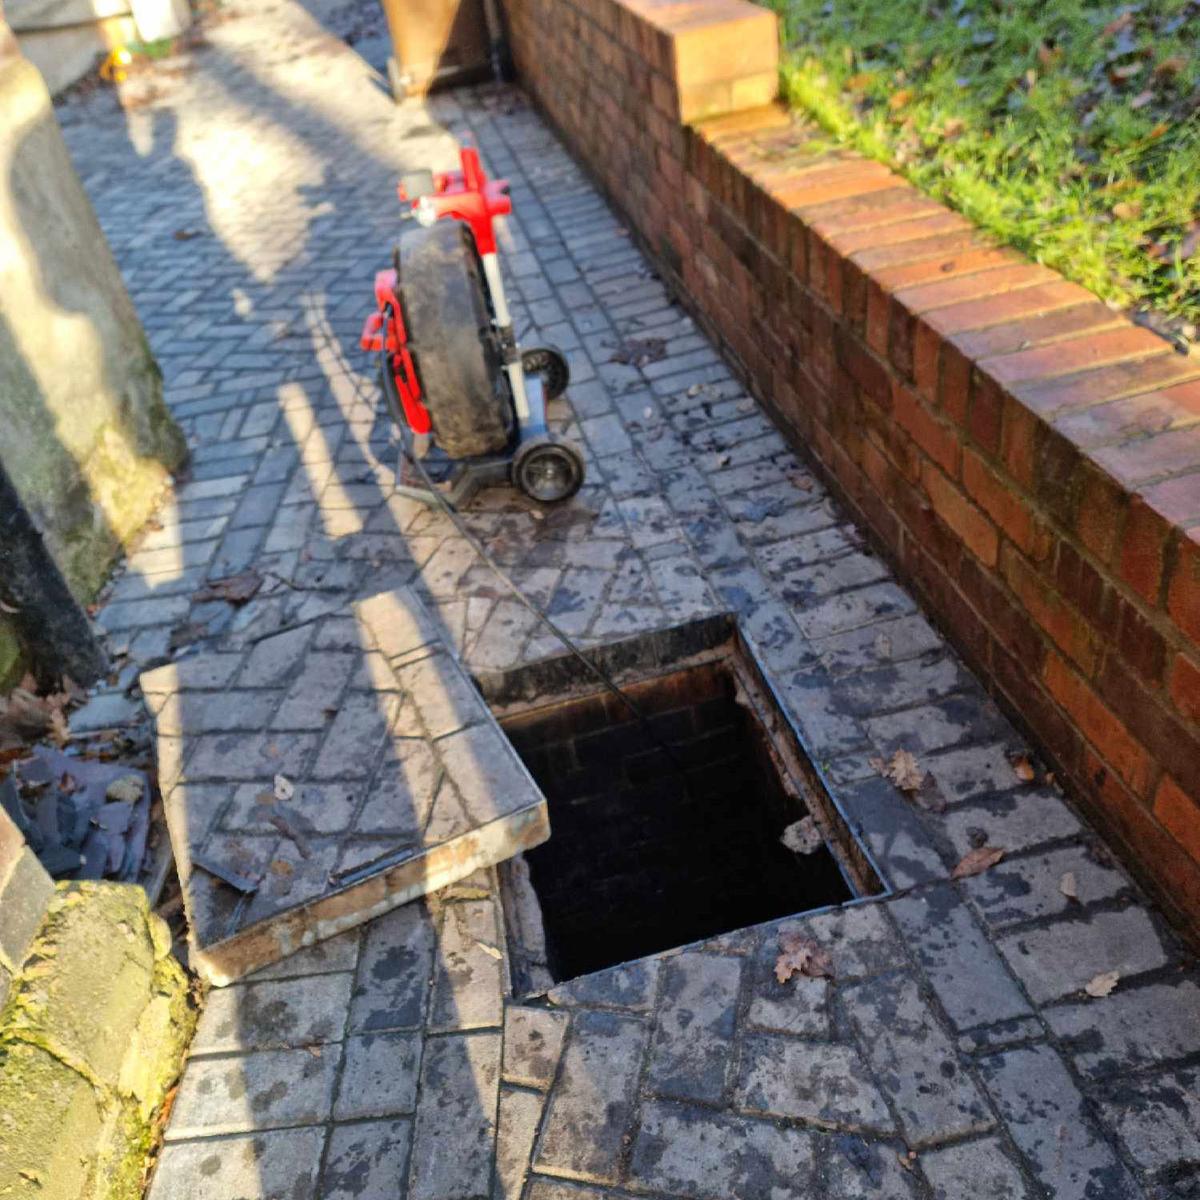 A photo of a high tech drain unblocking tool used to unblock drains.